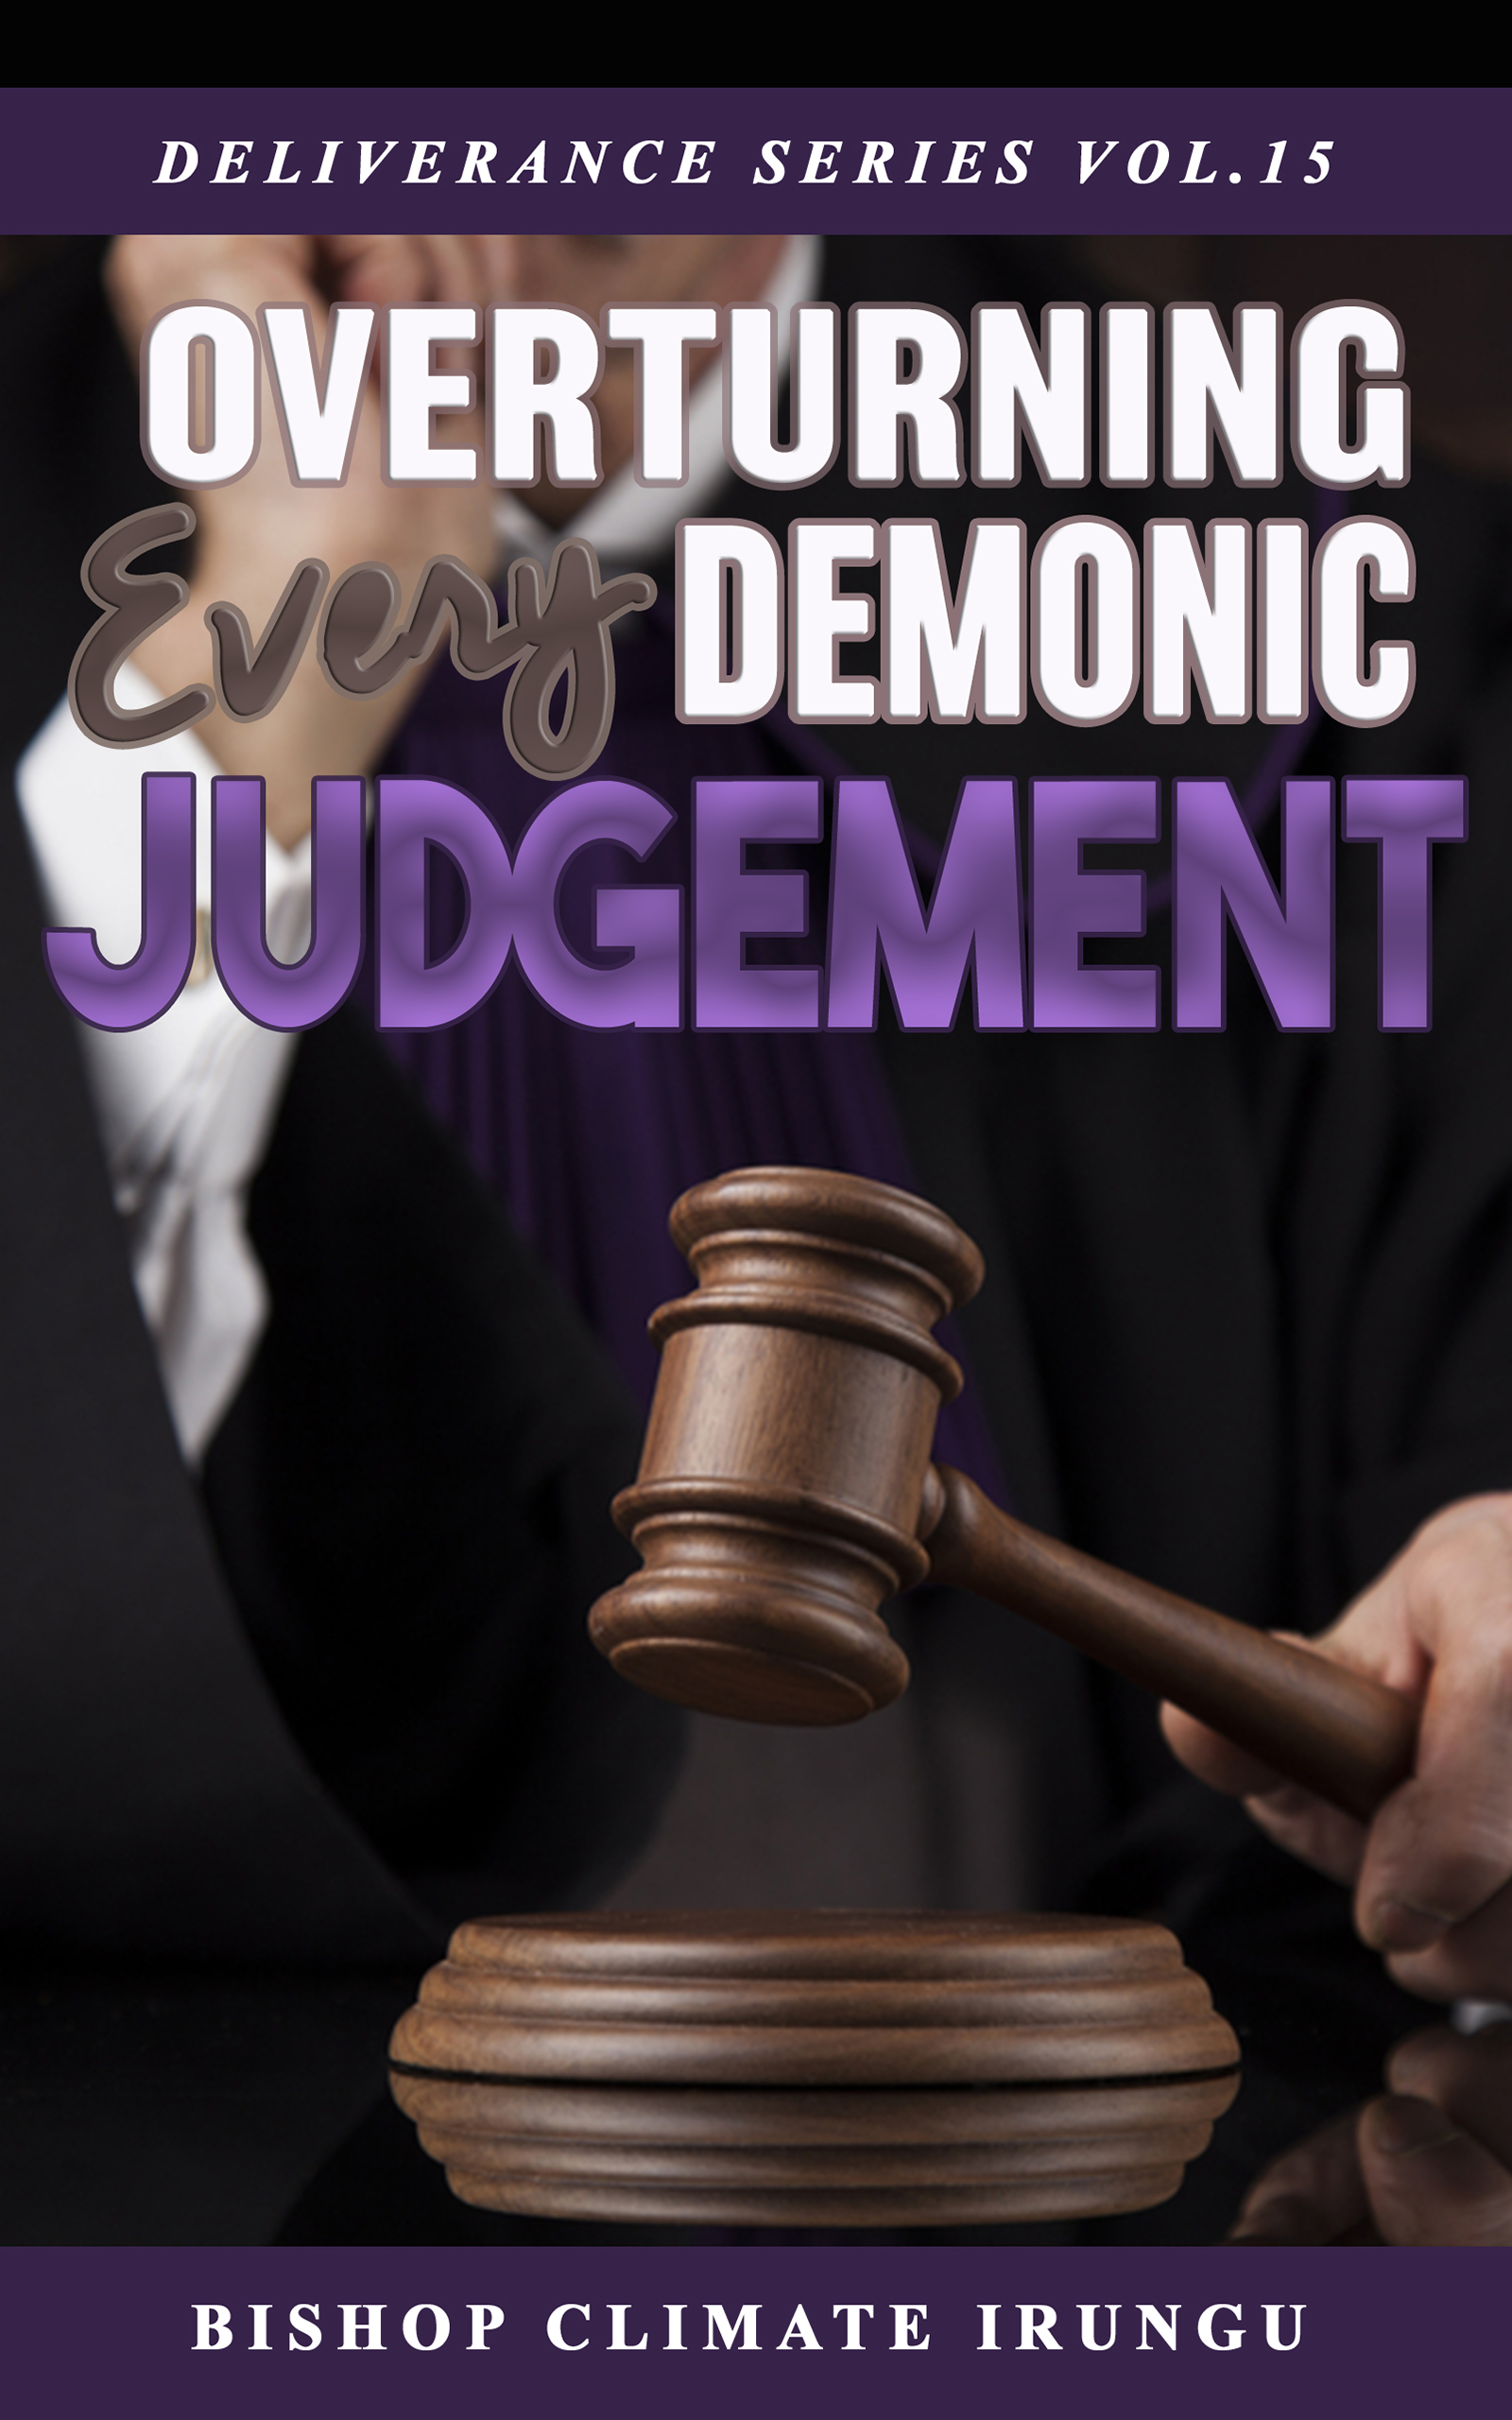 DS Vol 15 Overturning Every Demonic Judgement EBOOK KINDLE SIZE